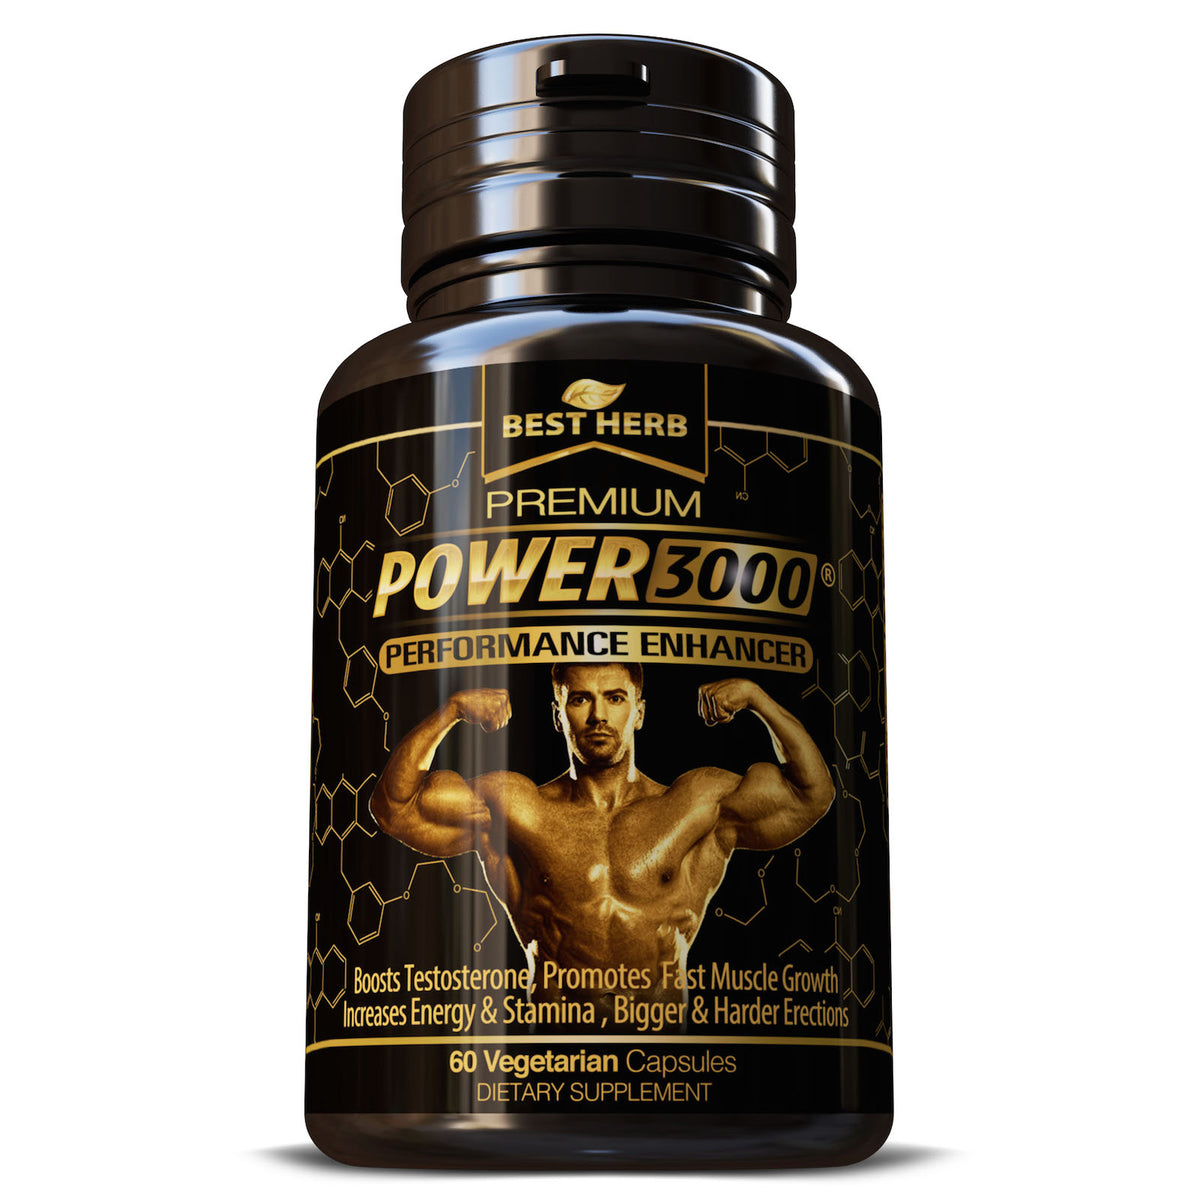 Power 3000 Male Performance Enhancer Fast Muscle Growth Testo Boost Purestherbal